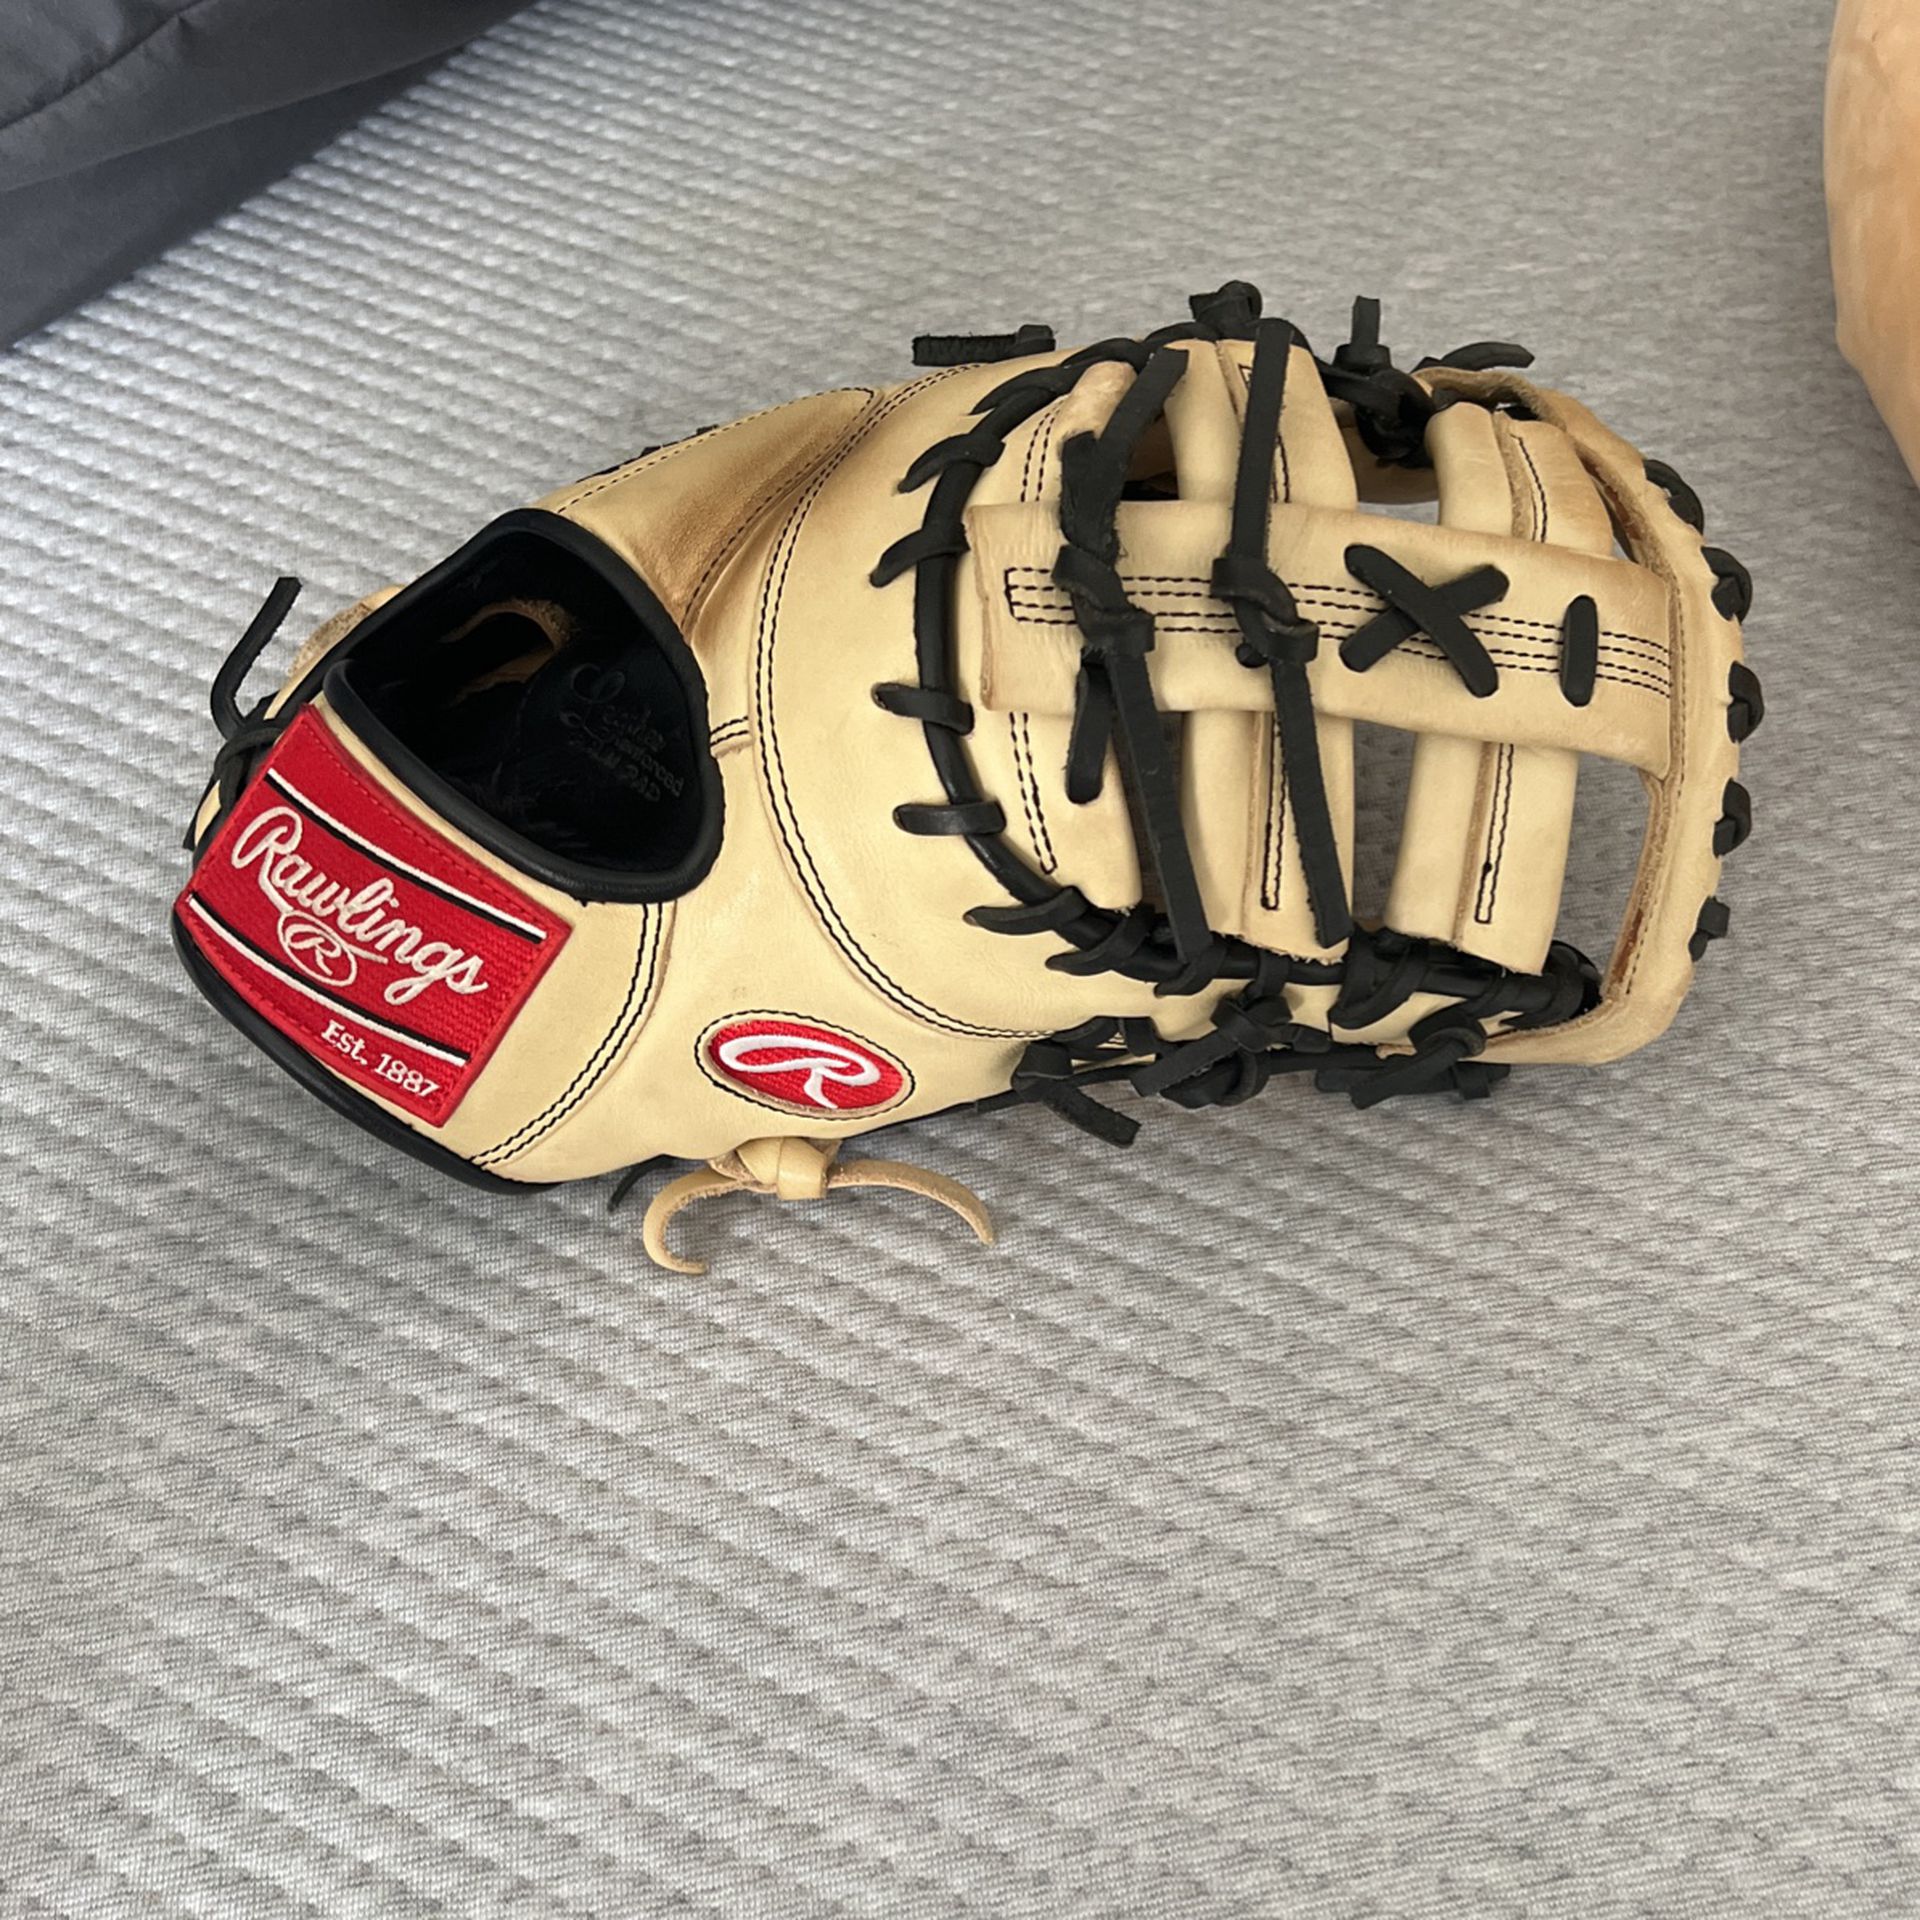 13 Inch Rawlings Right Handed First Basemen’s Glove